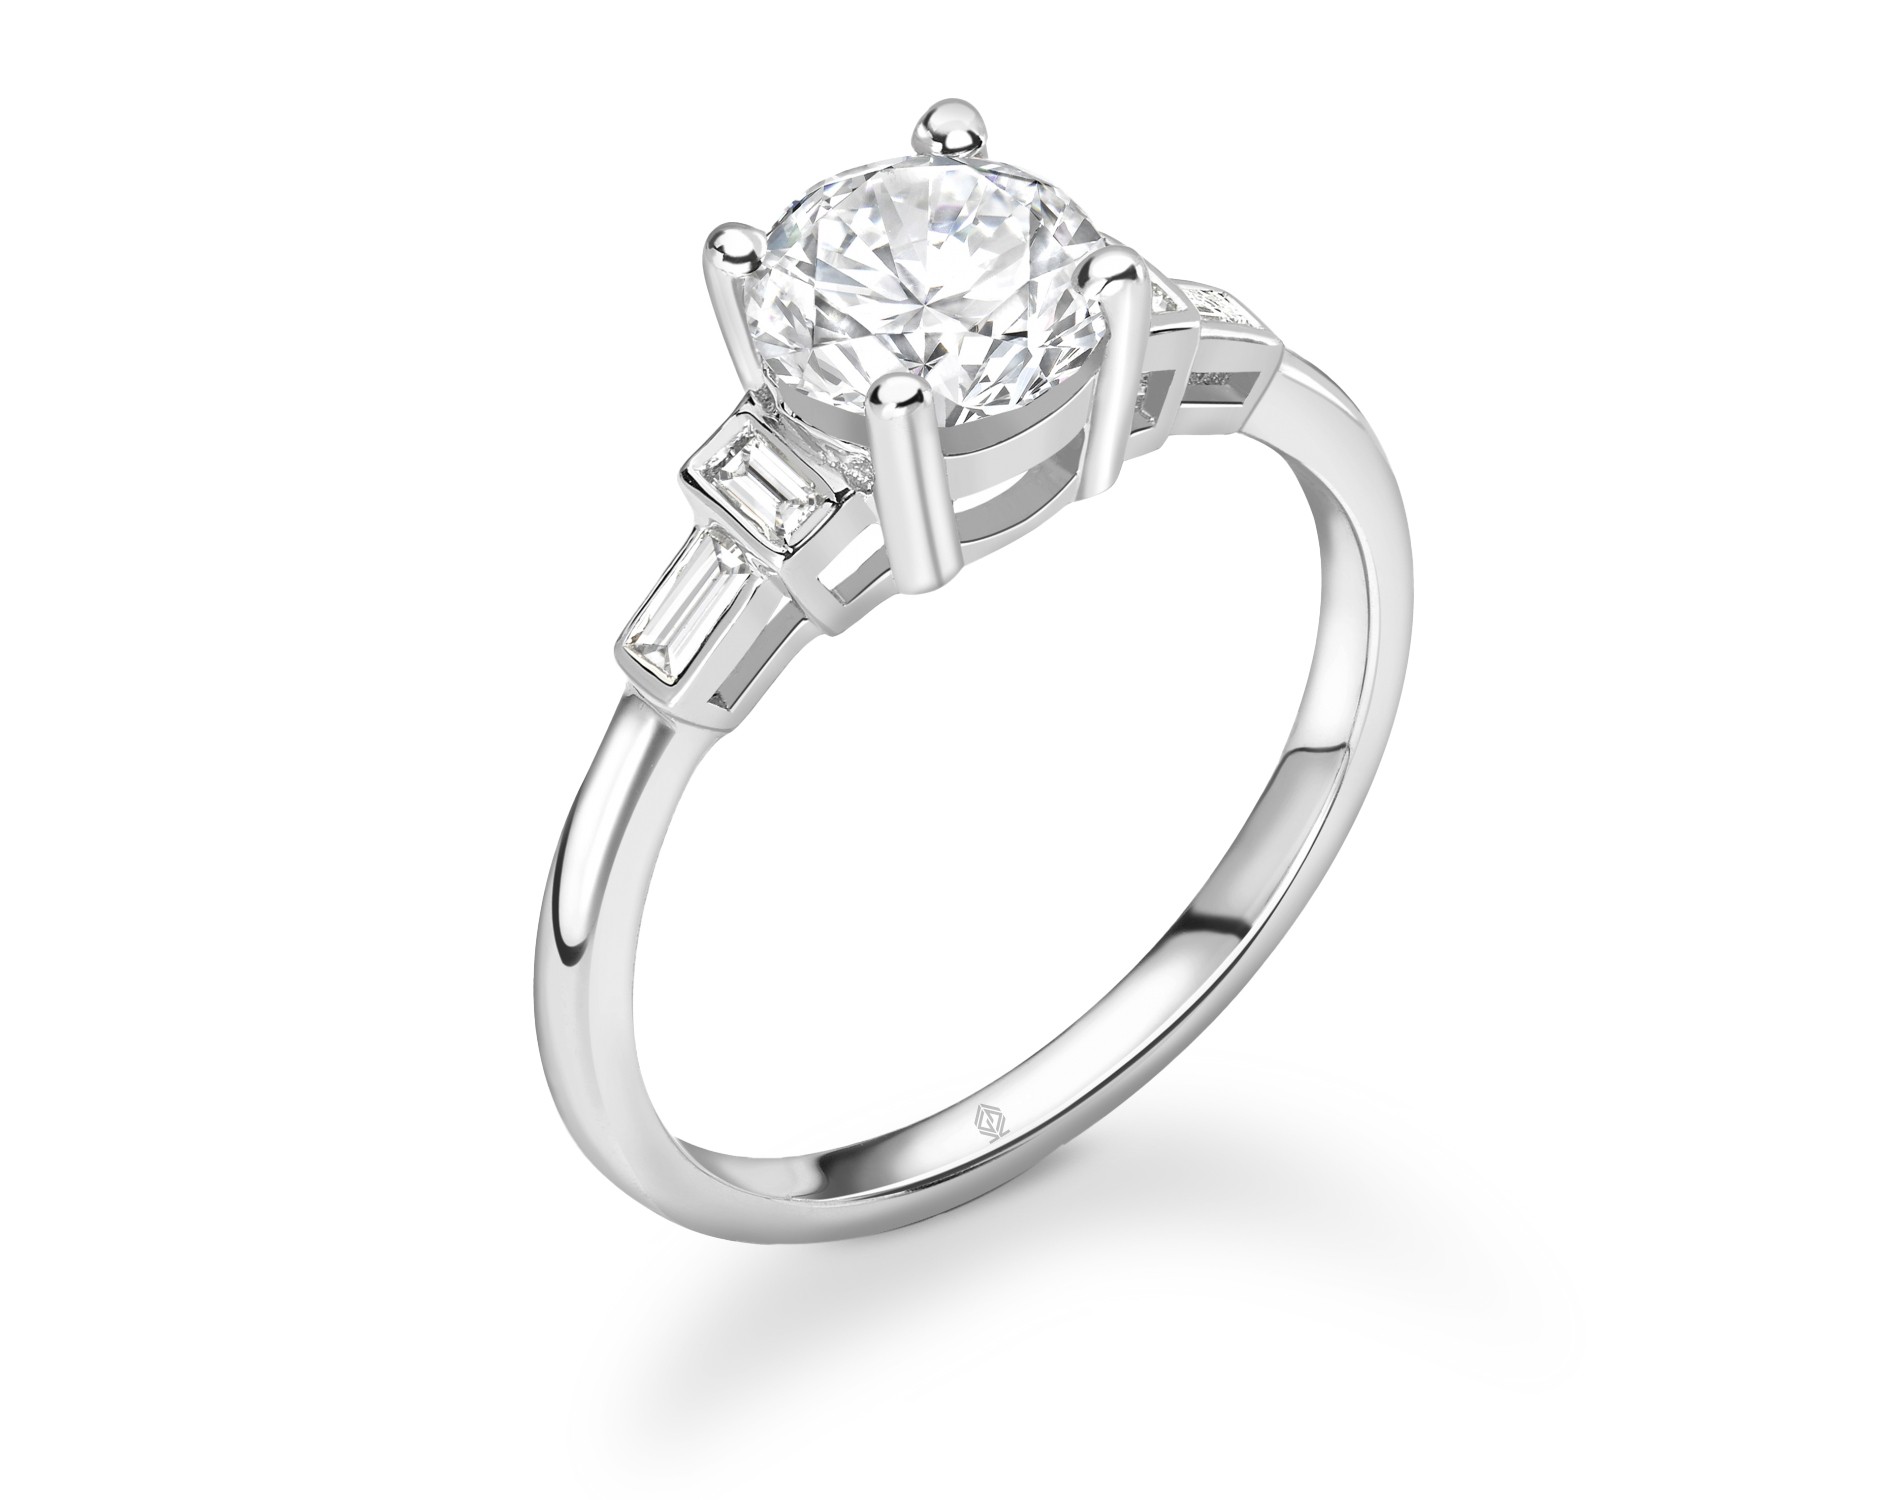 18K WHITE GOLD ROUND CUT 4 PRONGS DIAMOND ENGAGEMENT RING WITH BAGUETTES CUT SIDE STONES